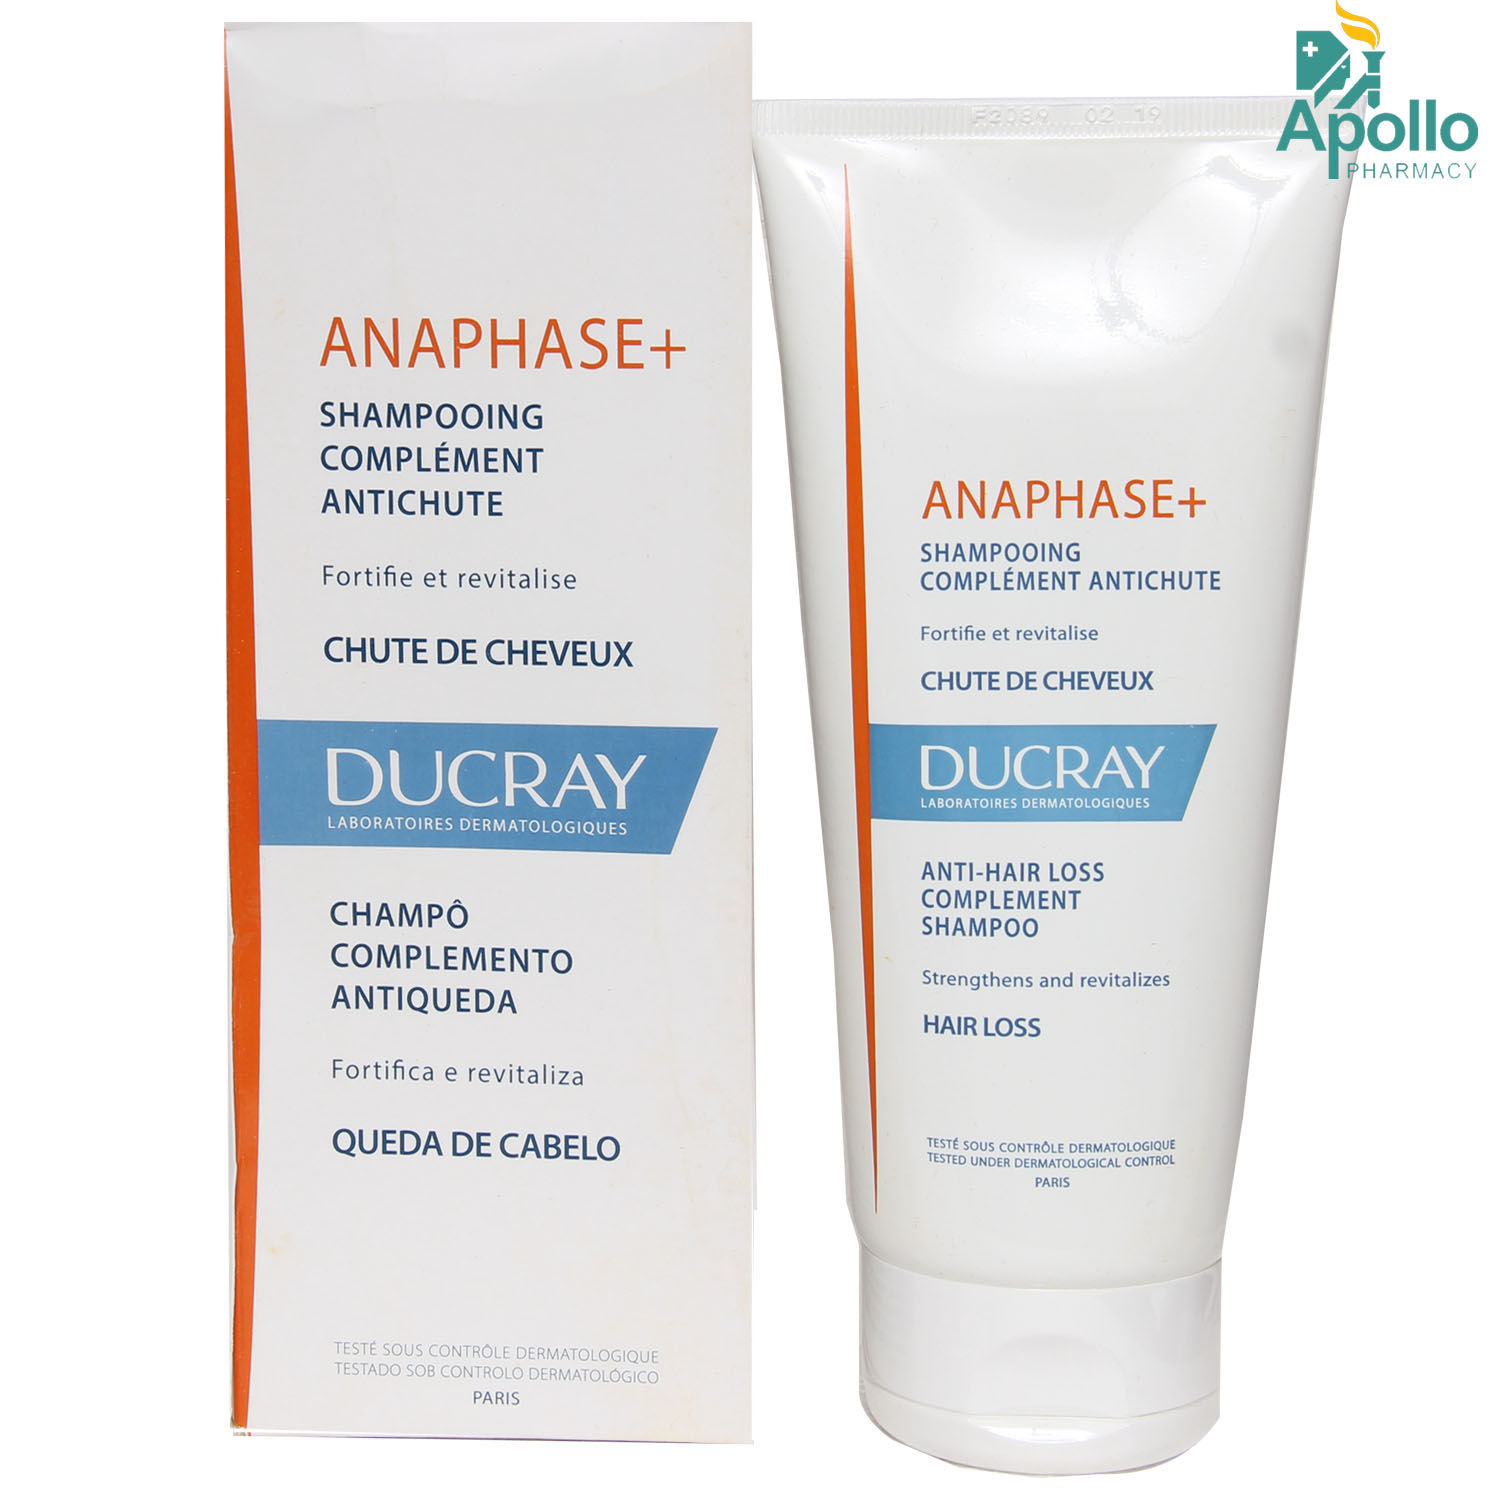 Ducray Anaphase+ Anti-Hair Loss Complement Shampoo, 200 ml, Pack of 1 Shampoo